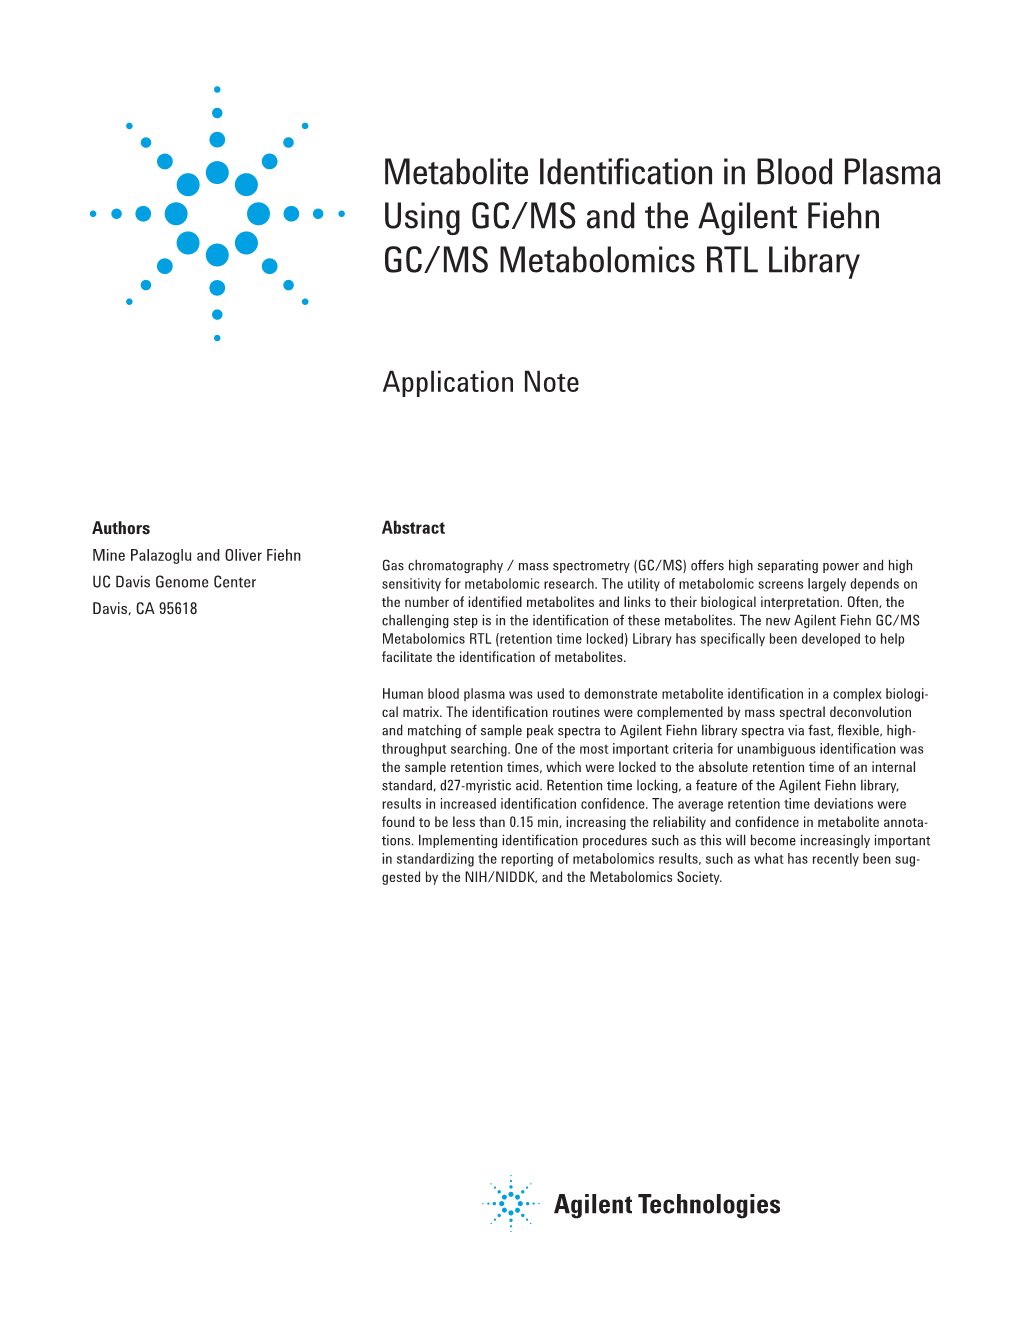 Metabolite Identification in Blood Plasma Using GC/MS and the Agilent Fiehn GC/MS Metabolomics RTL Library